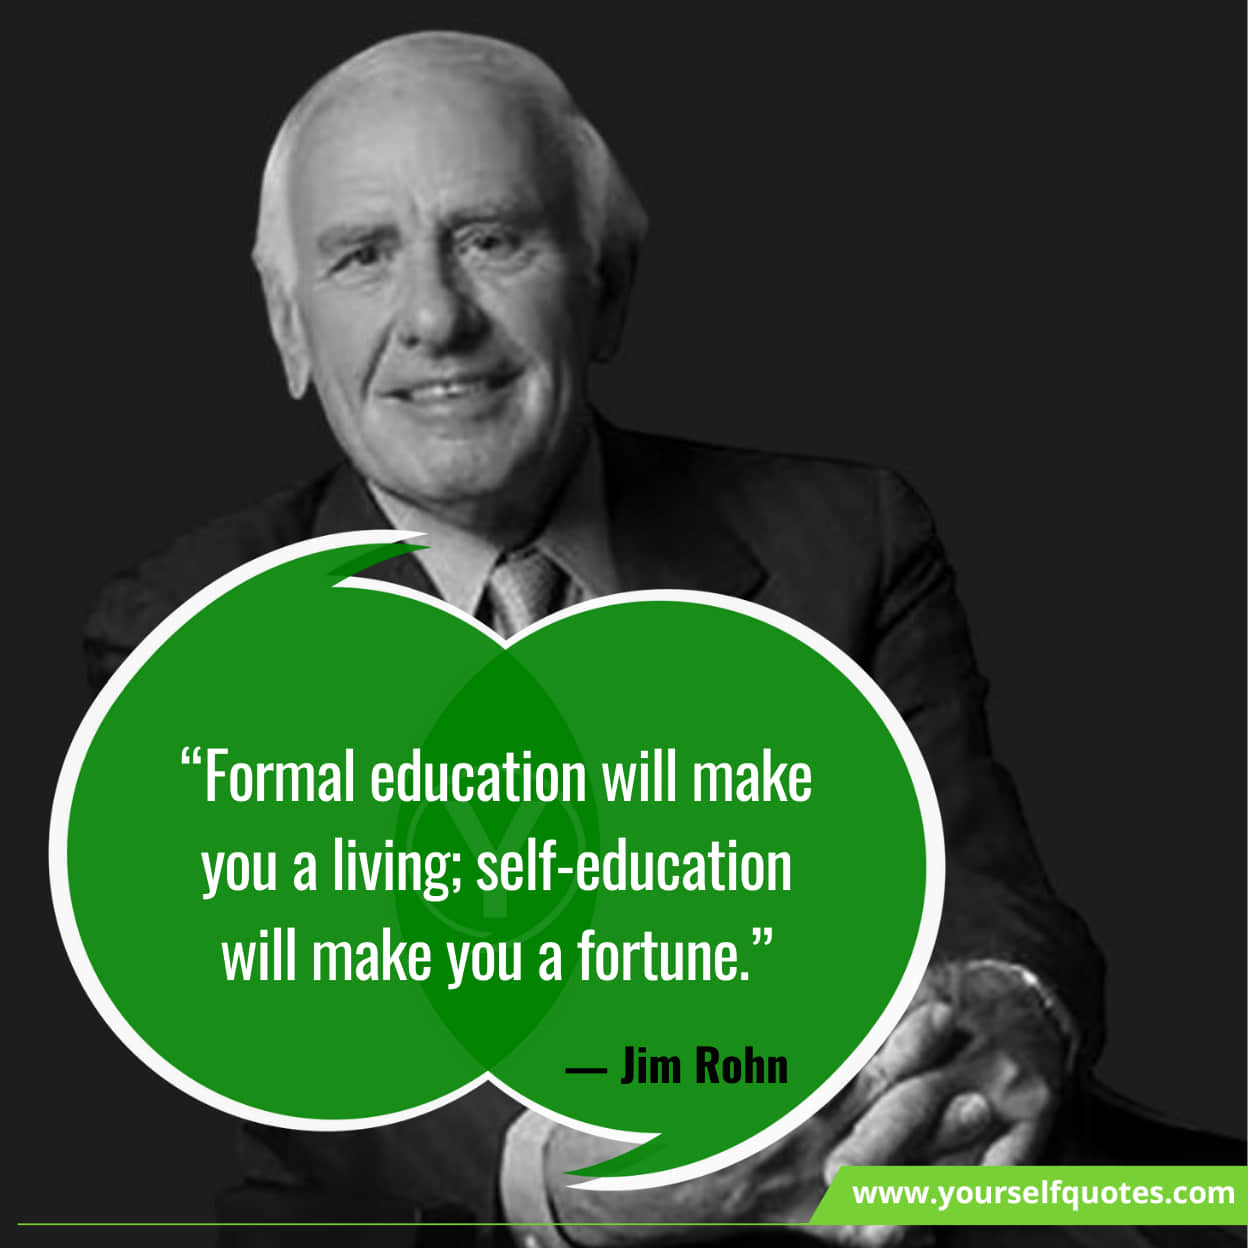 Jim Rohn Quotes To Encourage You For Success In Life - Waking Up To A ...